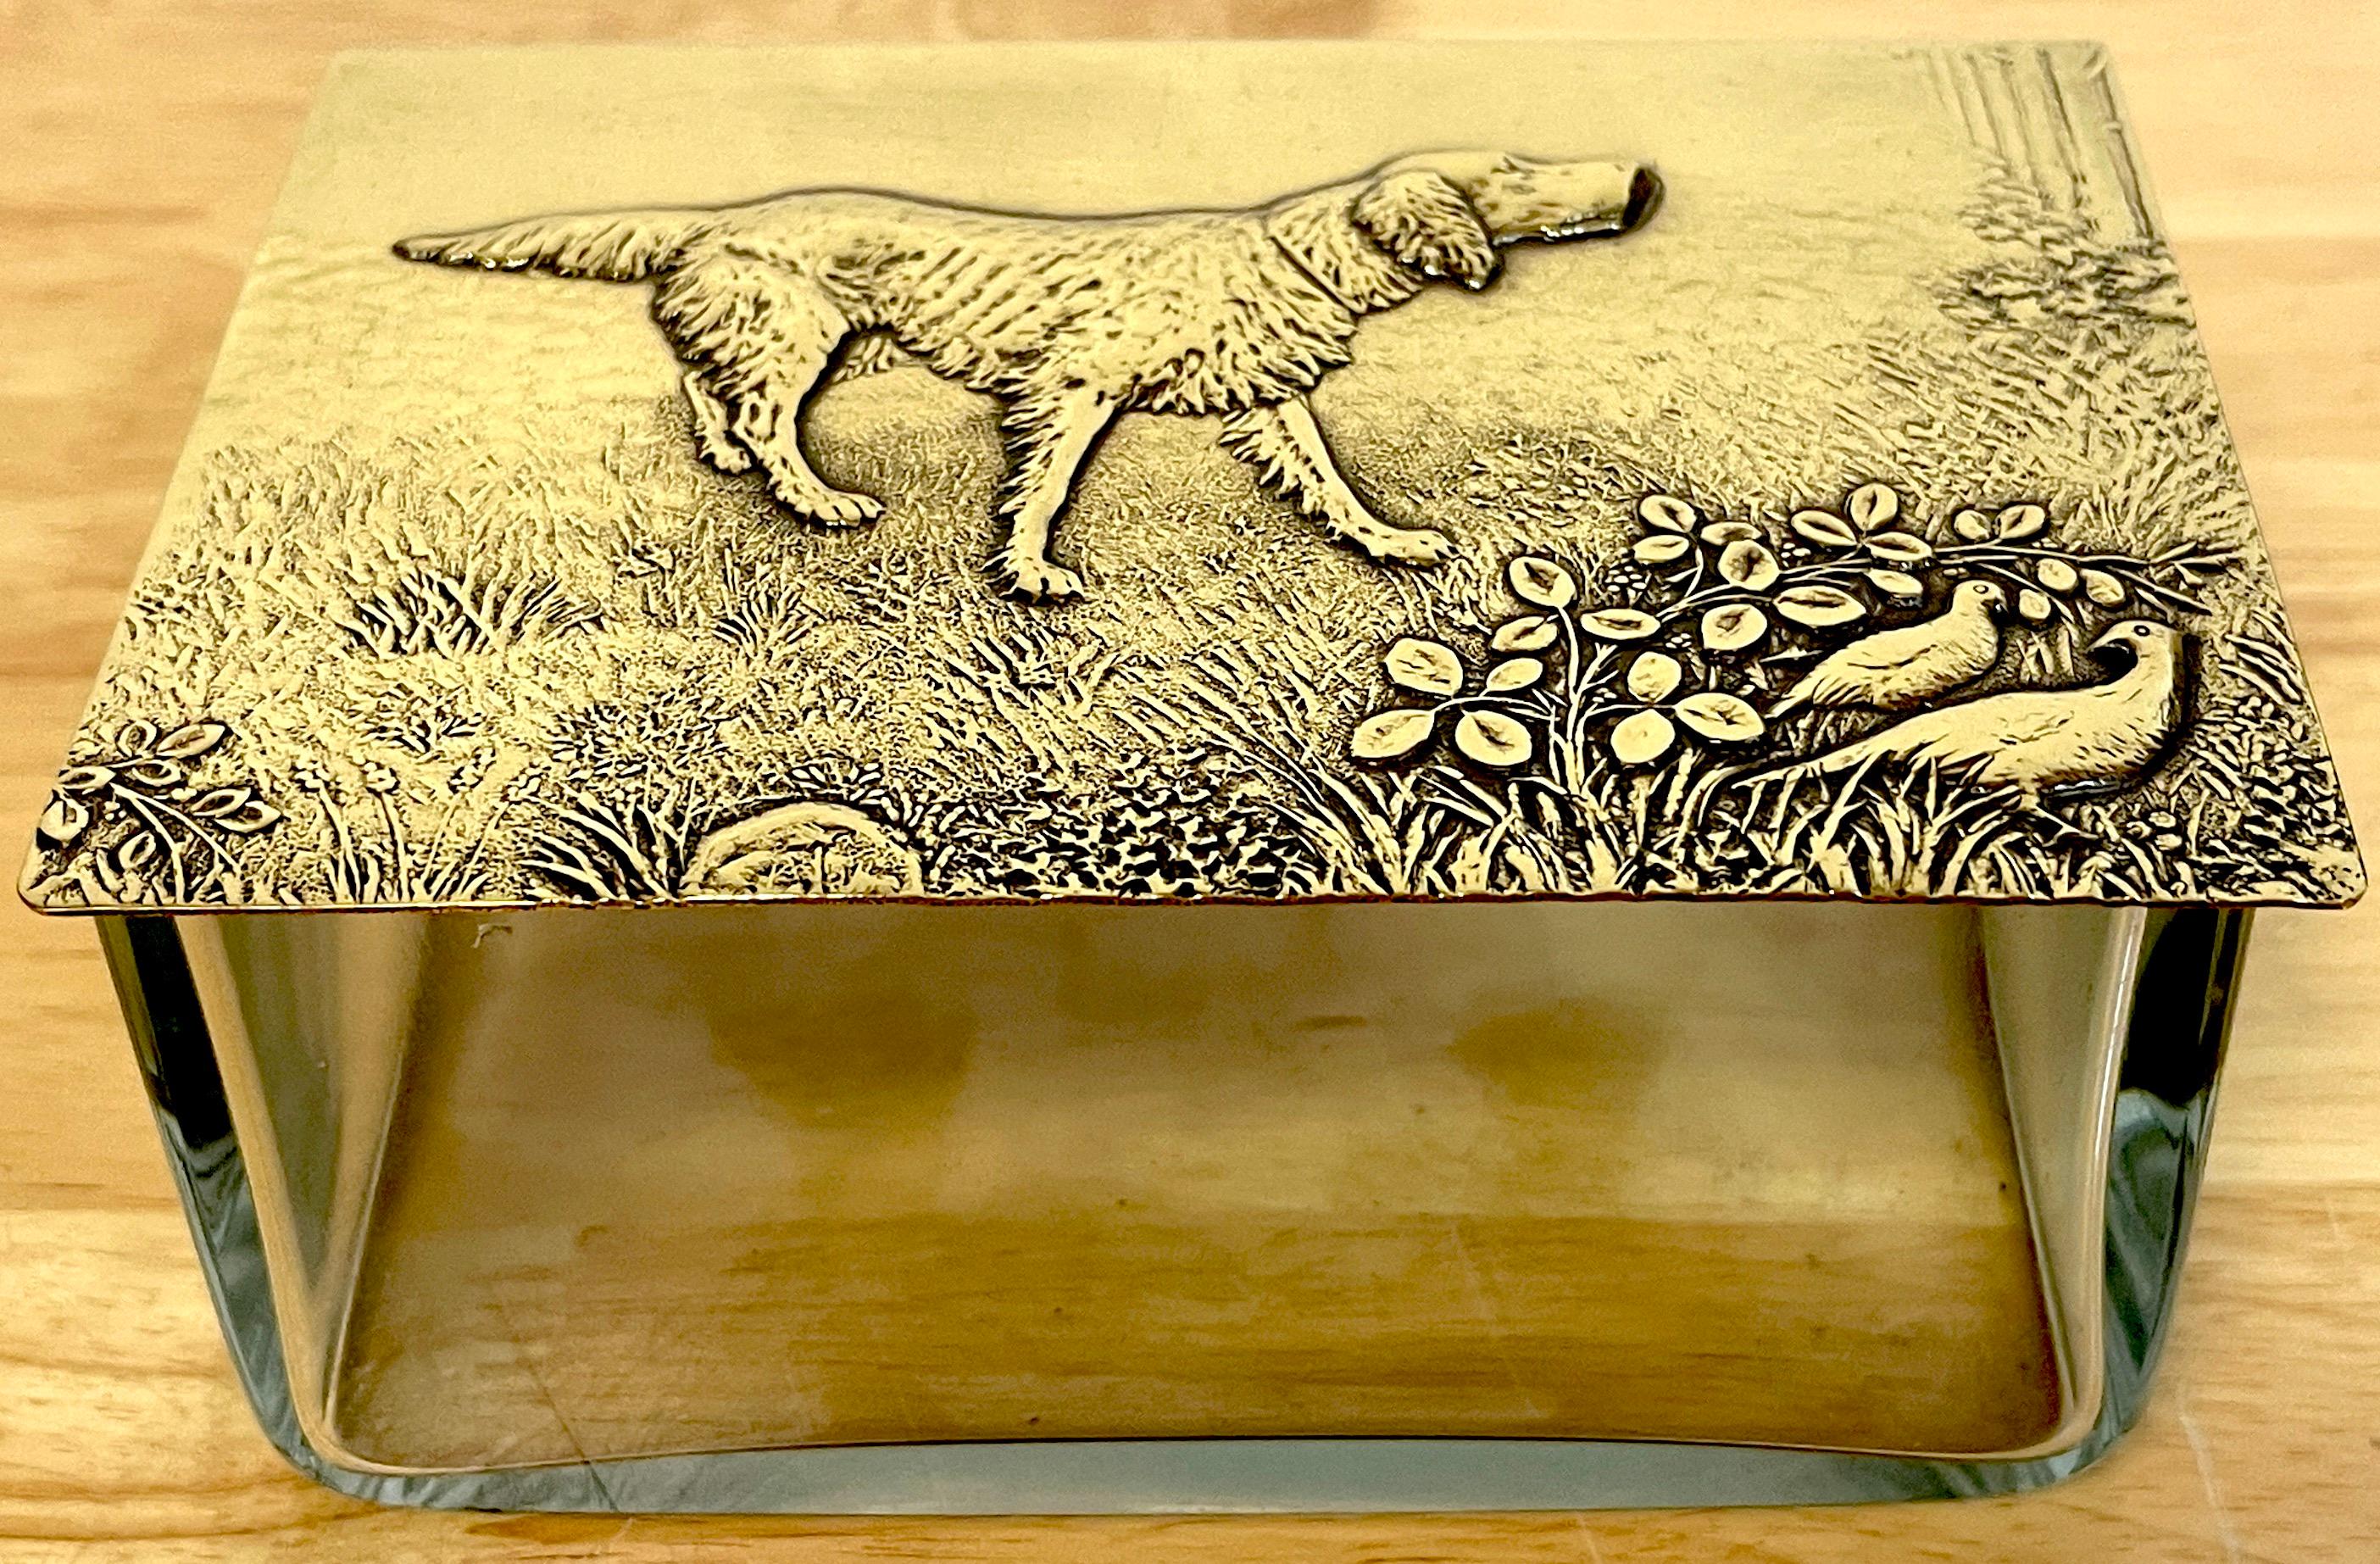 WMF Brass & Crystal Hunting Dog Motif Table Box, 
Germany, circa 1925

Of rectangular form the brass hinged top decorated with chased and engraved decoration of hunting dog in landscape. Resting on a subtle clear cut crystal bottom. Unmarked